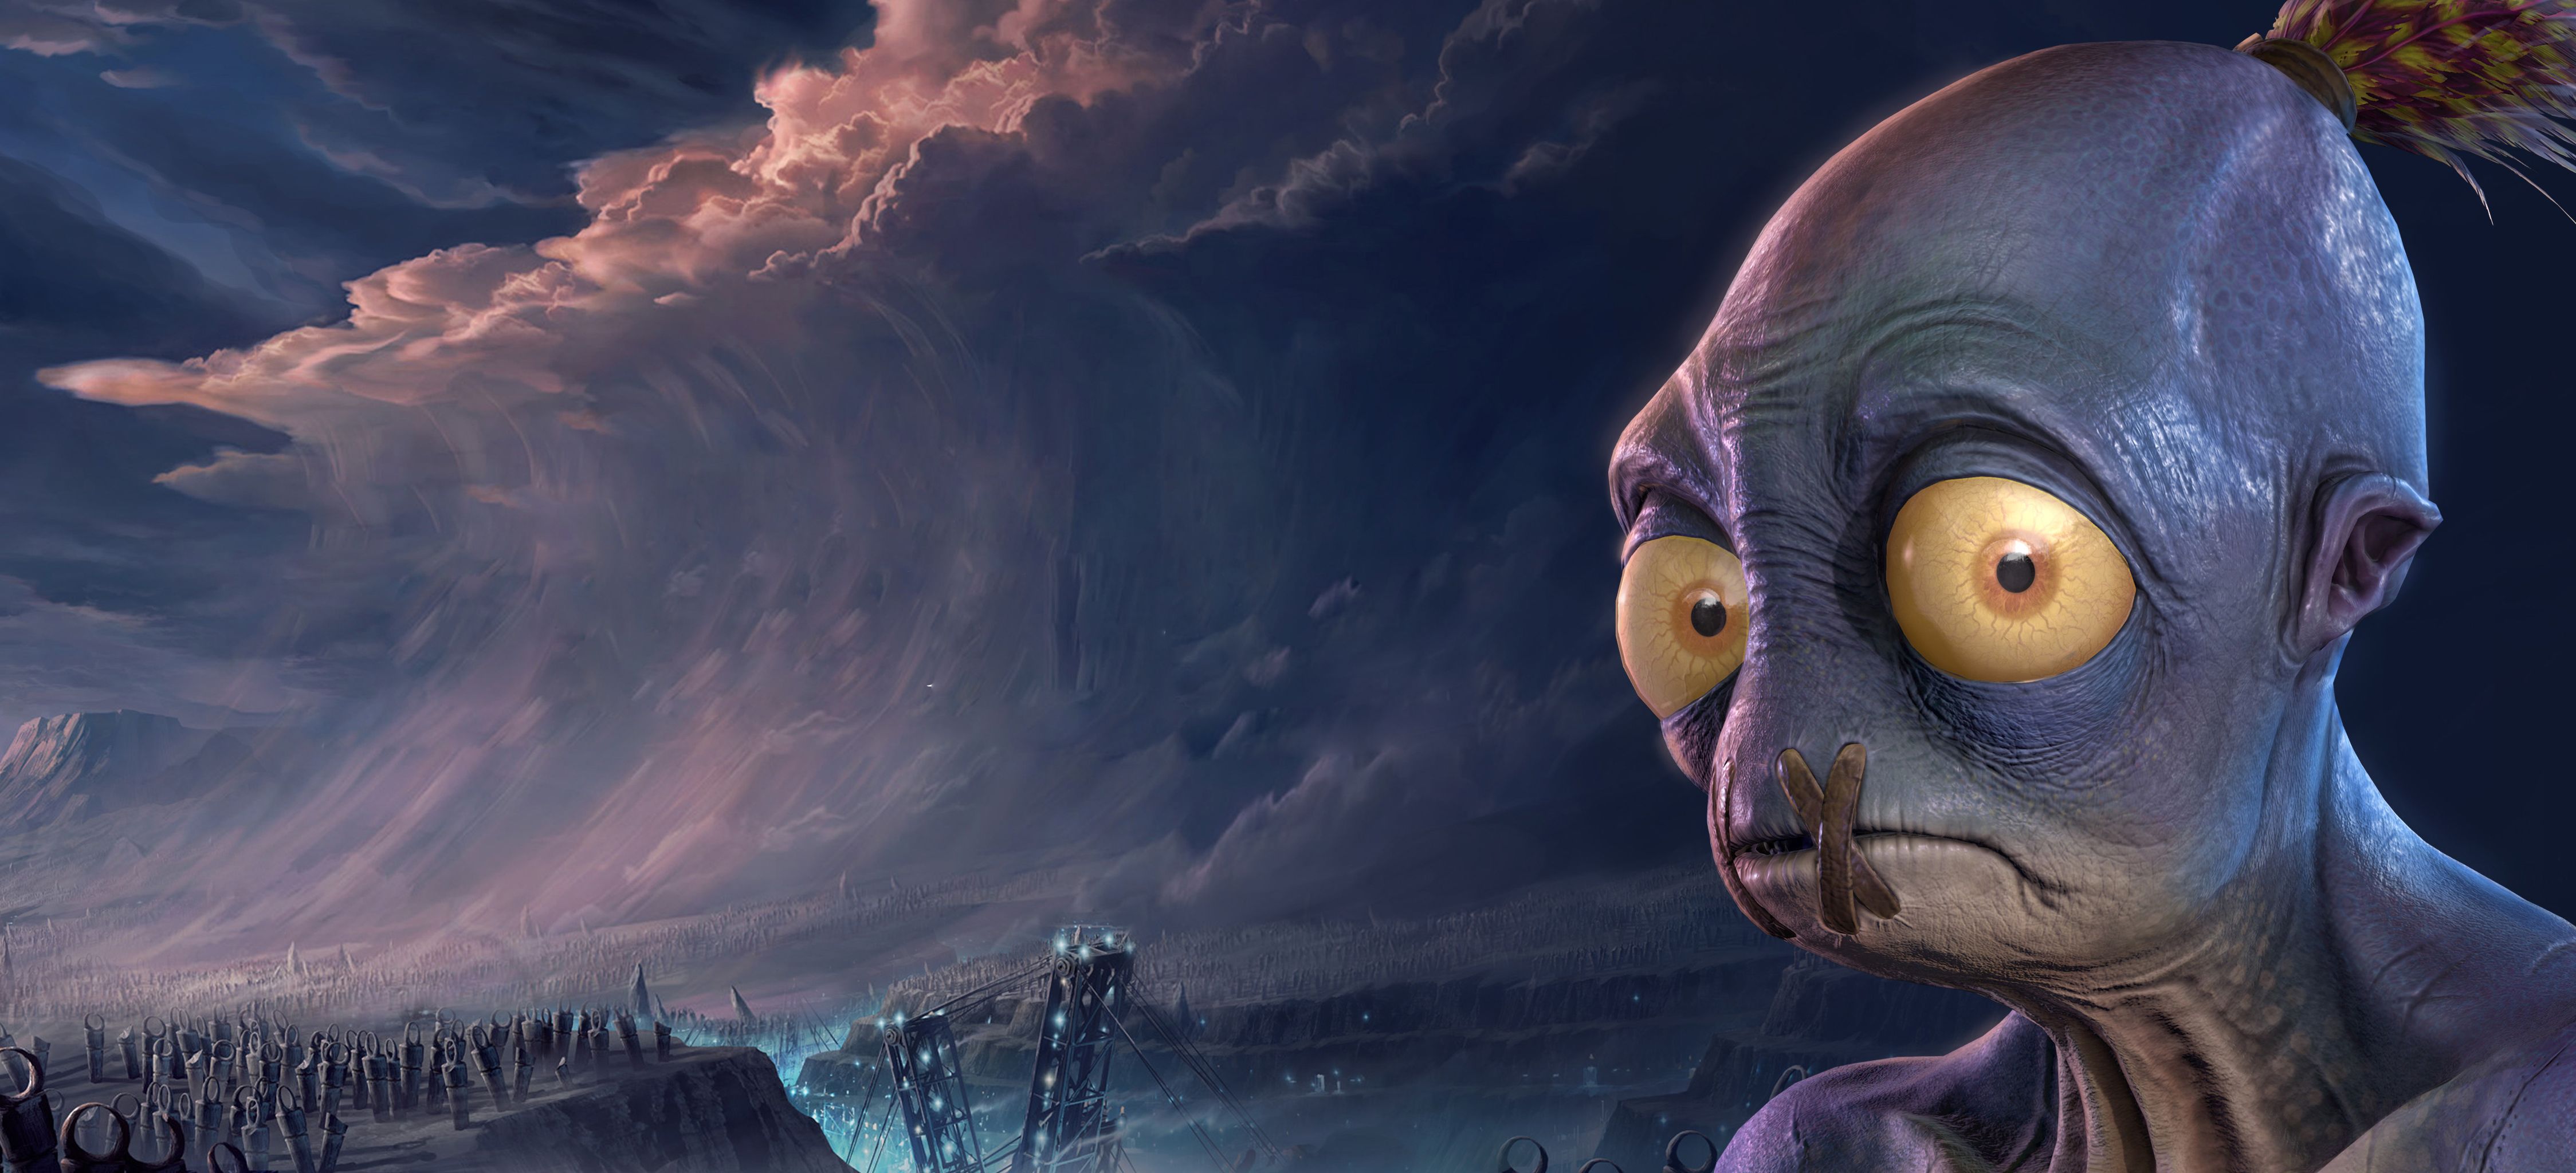 Oddworld Soulstorm Game Wallpaper, HD Games 4K Wallpaper, Image, Photo and Background